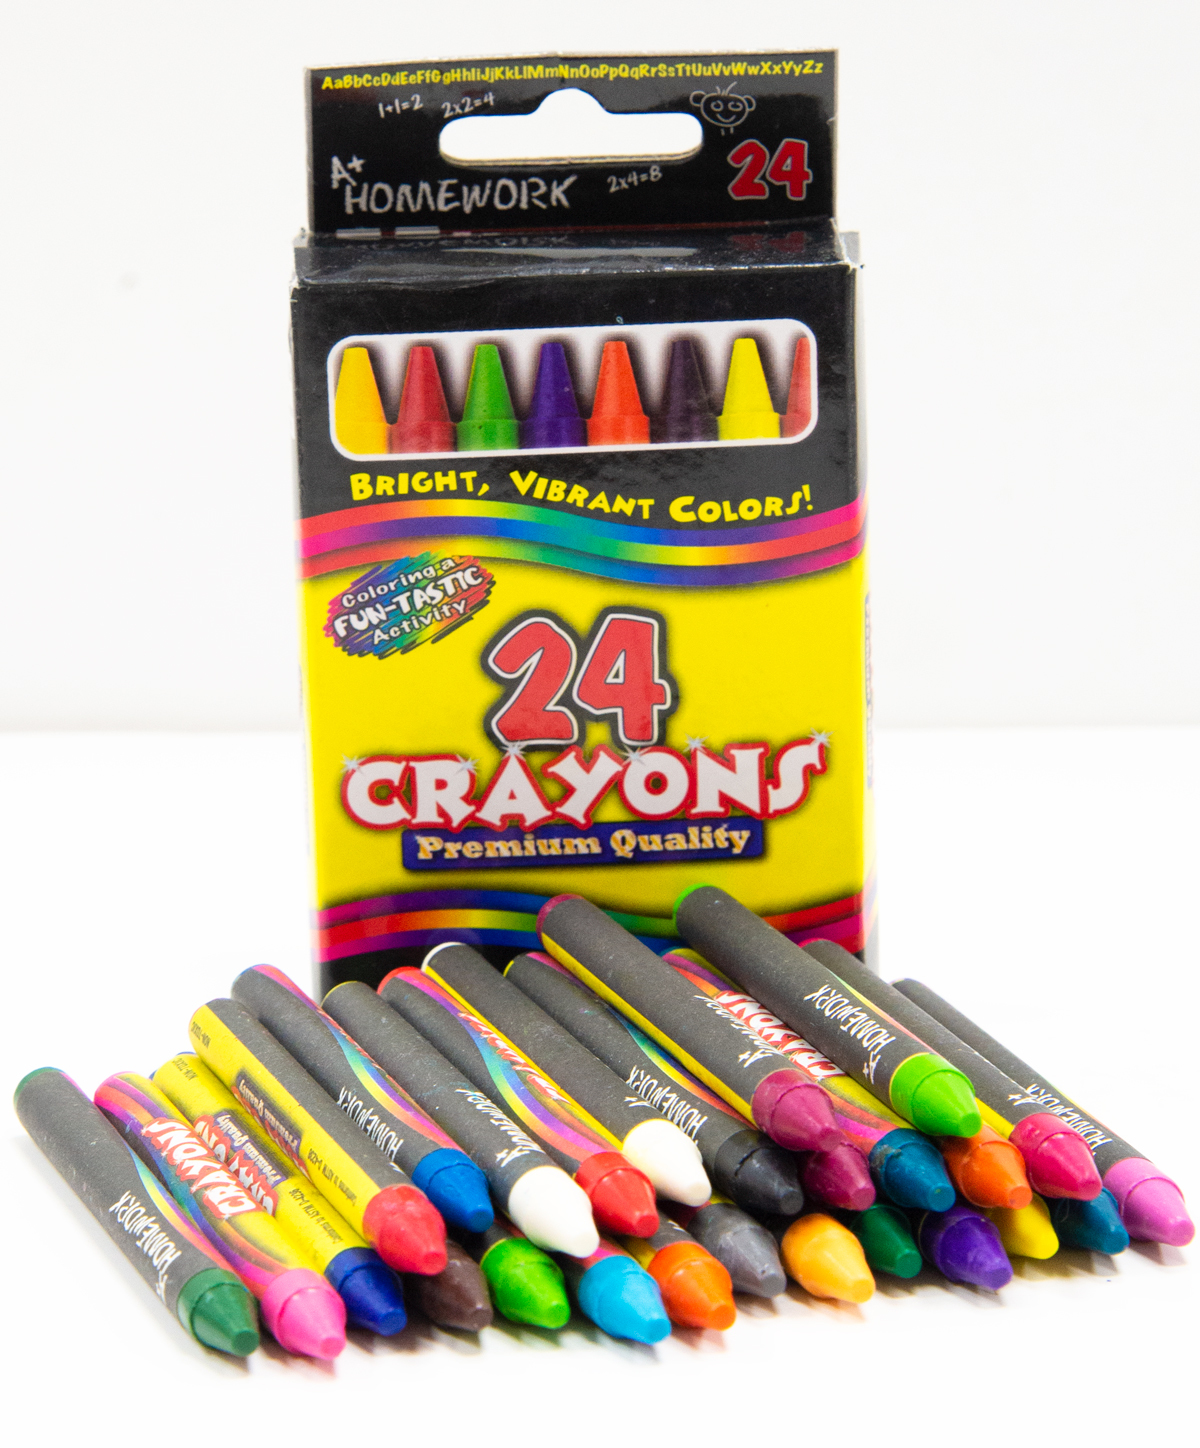 2 Pack of Crayons with Crayon Sharpener, Crayons 24 Count, Assorted Colors  – Crayons Bulk, Crayons Bulk for Classroom, School Supplies for Kids :  : Toys & Games